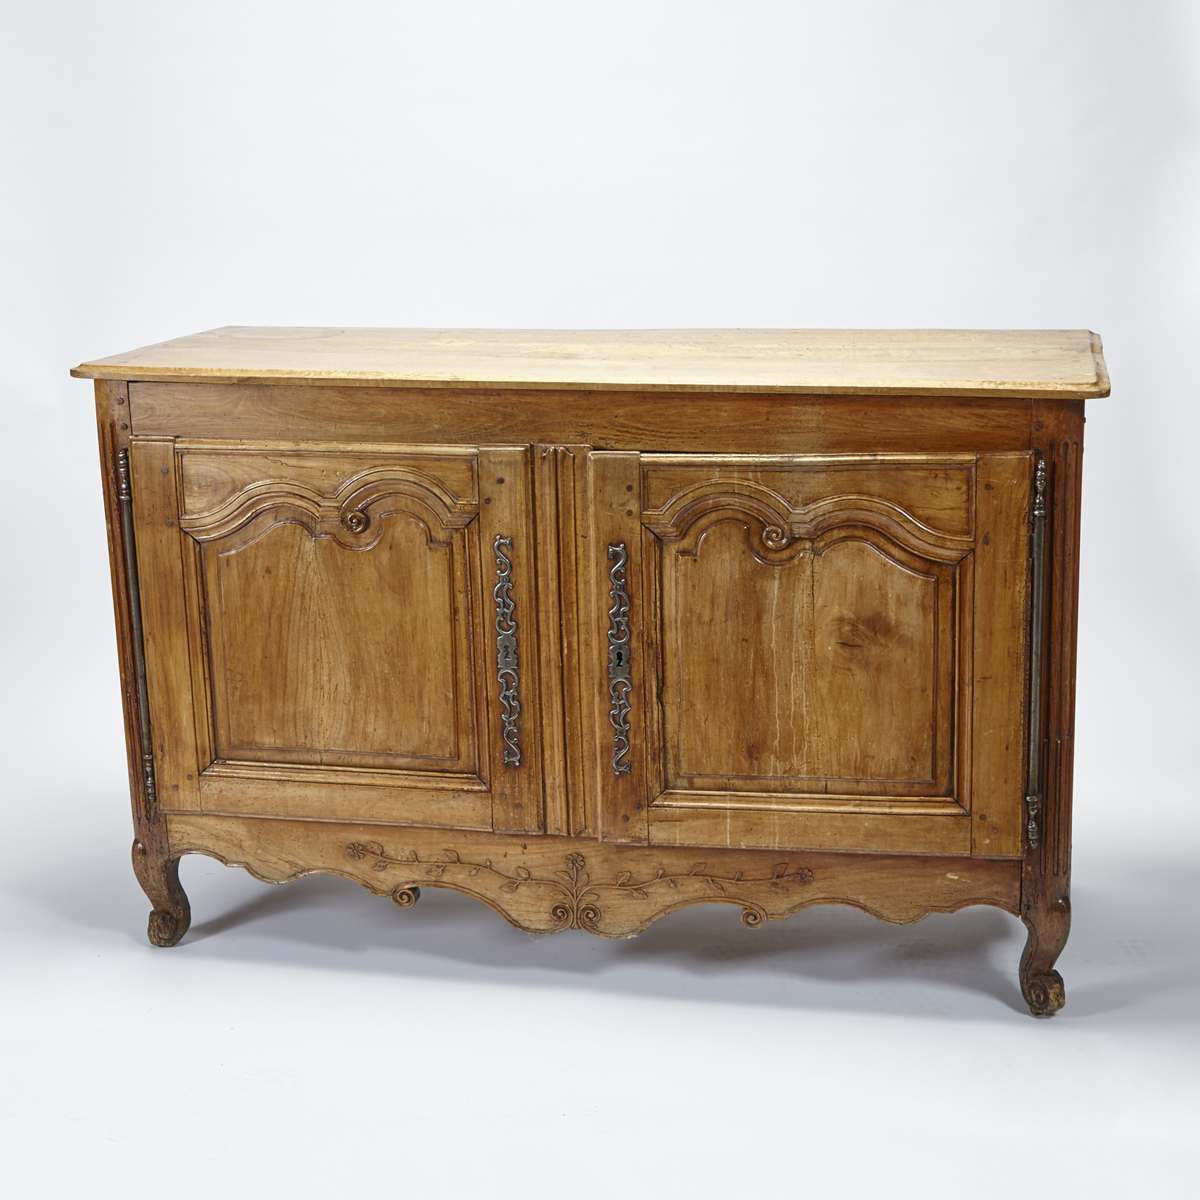 Quebec Butternut Two Door Side Cabinet in the Louis 15th style, late 18th century